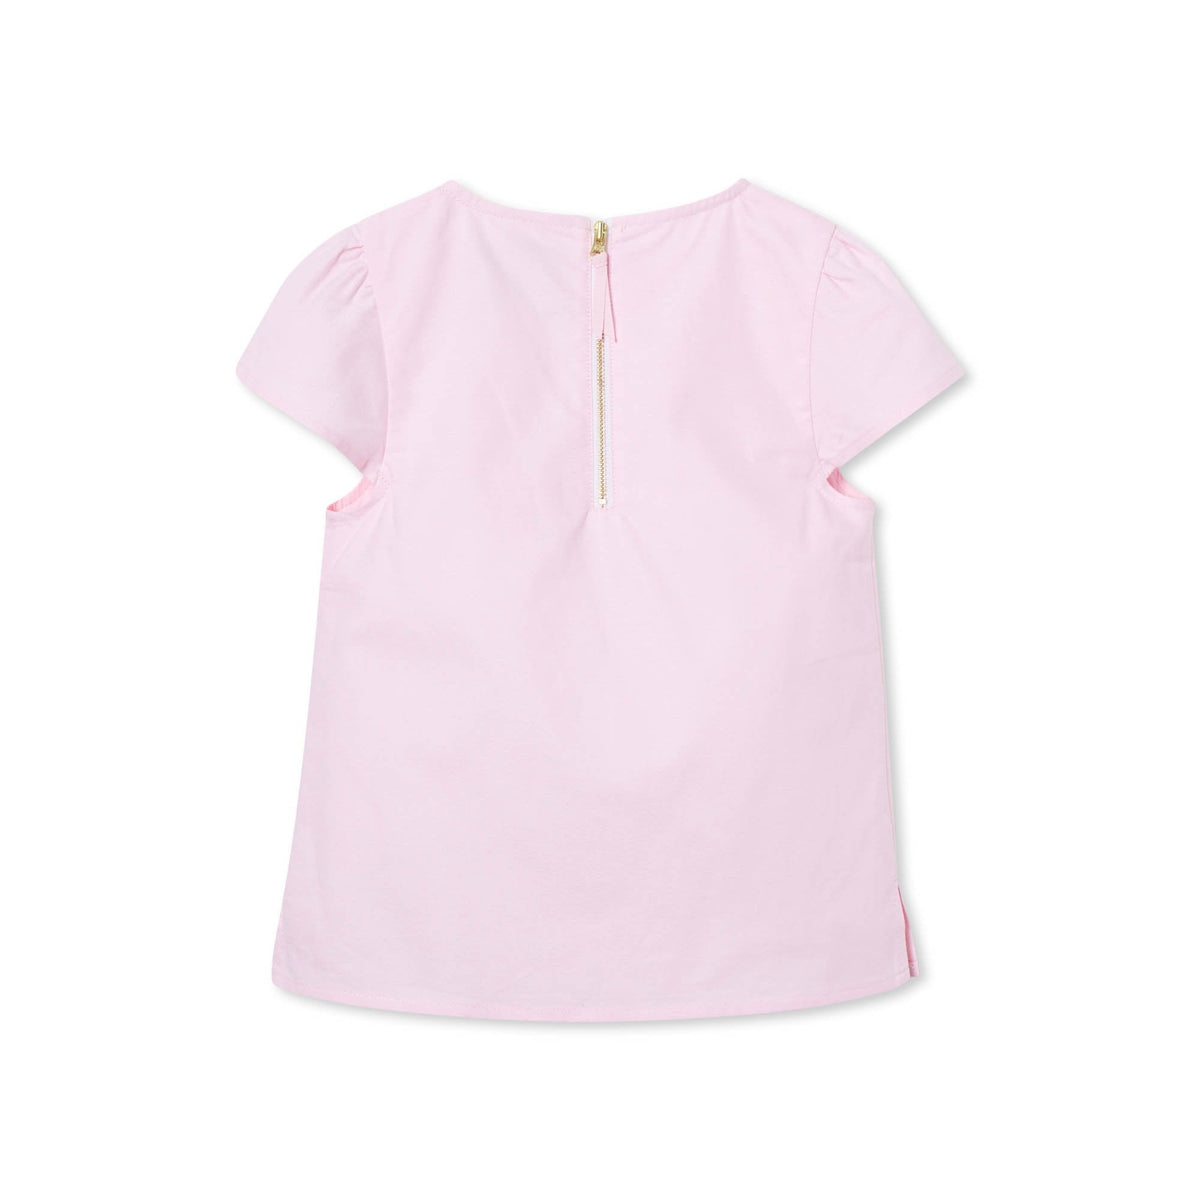 Classic and Preppy Sawyer Top, Pinkesque Oxford-Shirts and Tops-CPC - Classic Prep Childrenswear